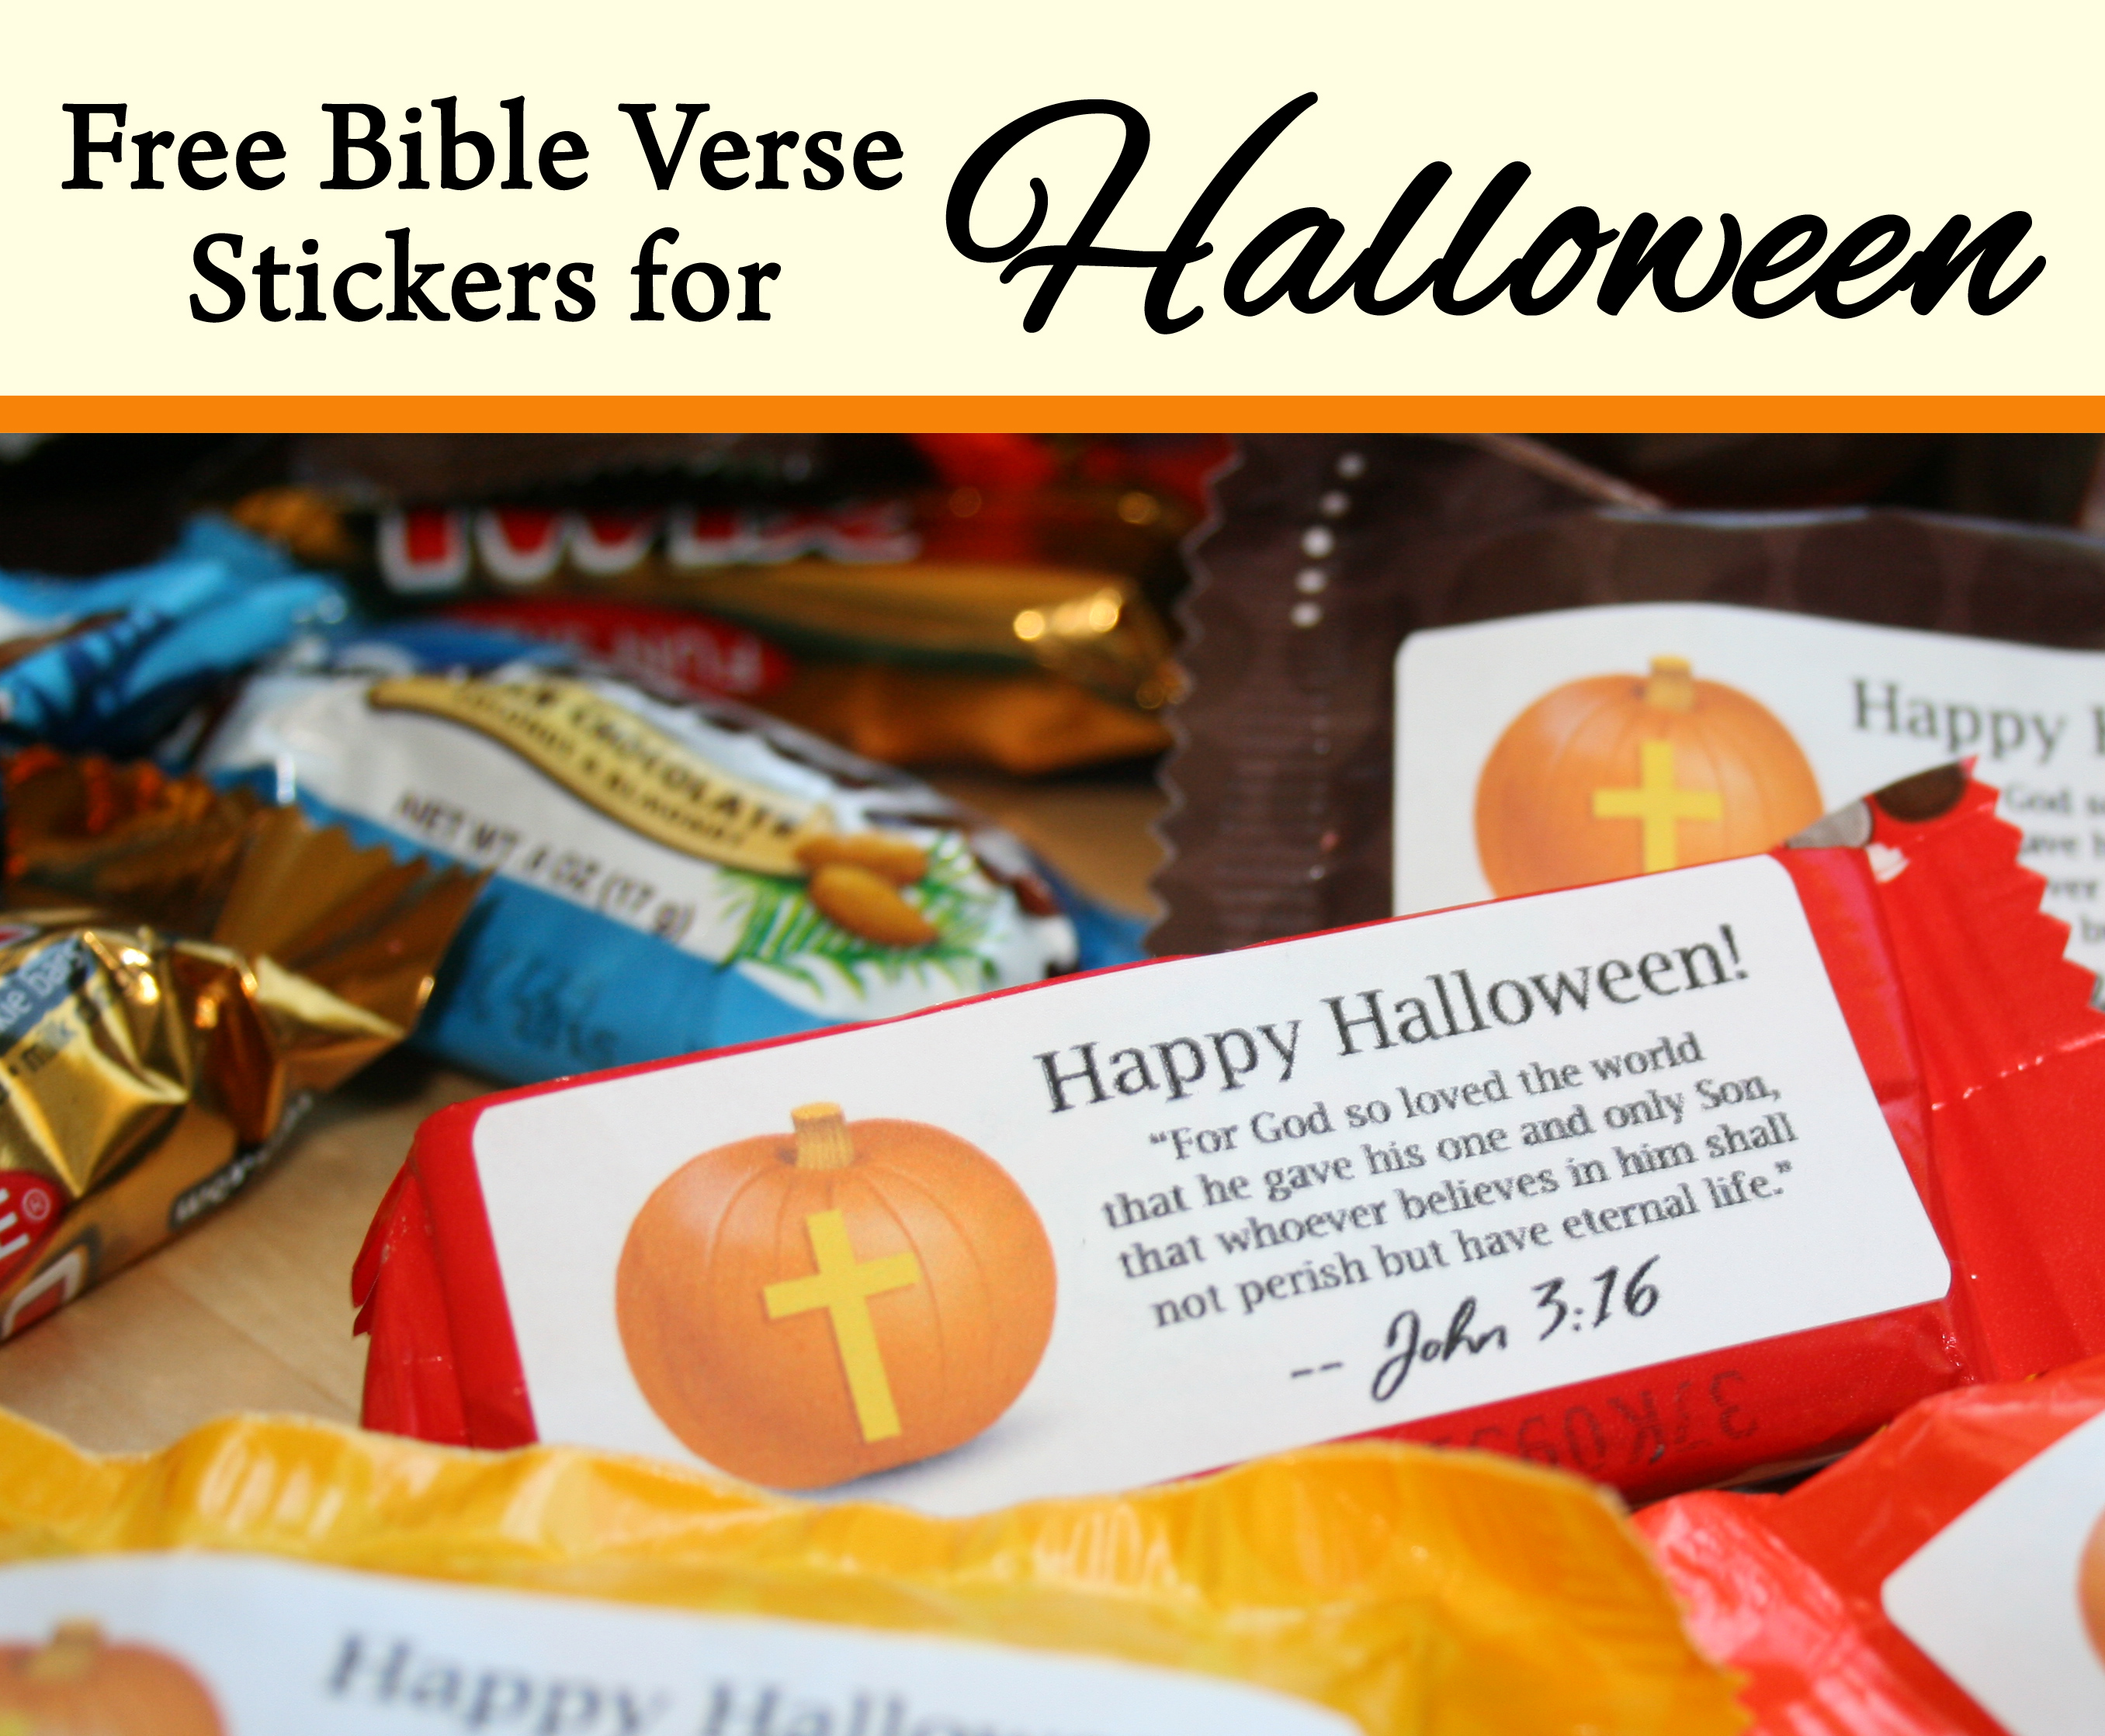 Bible Verse Stickers for Halloween Candy